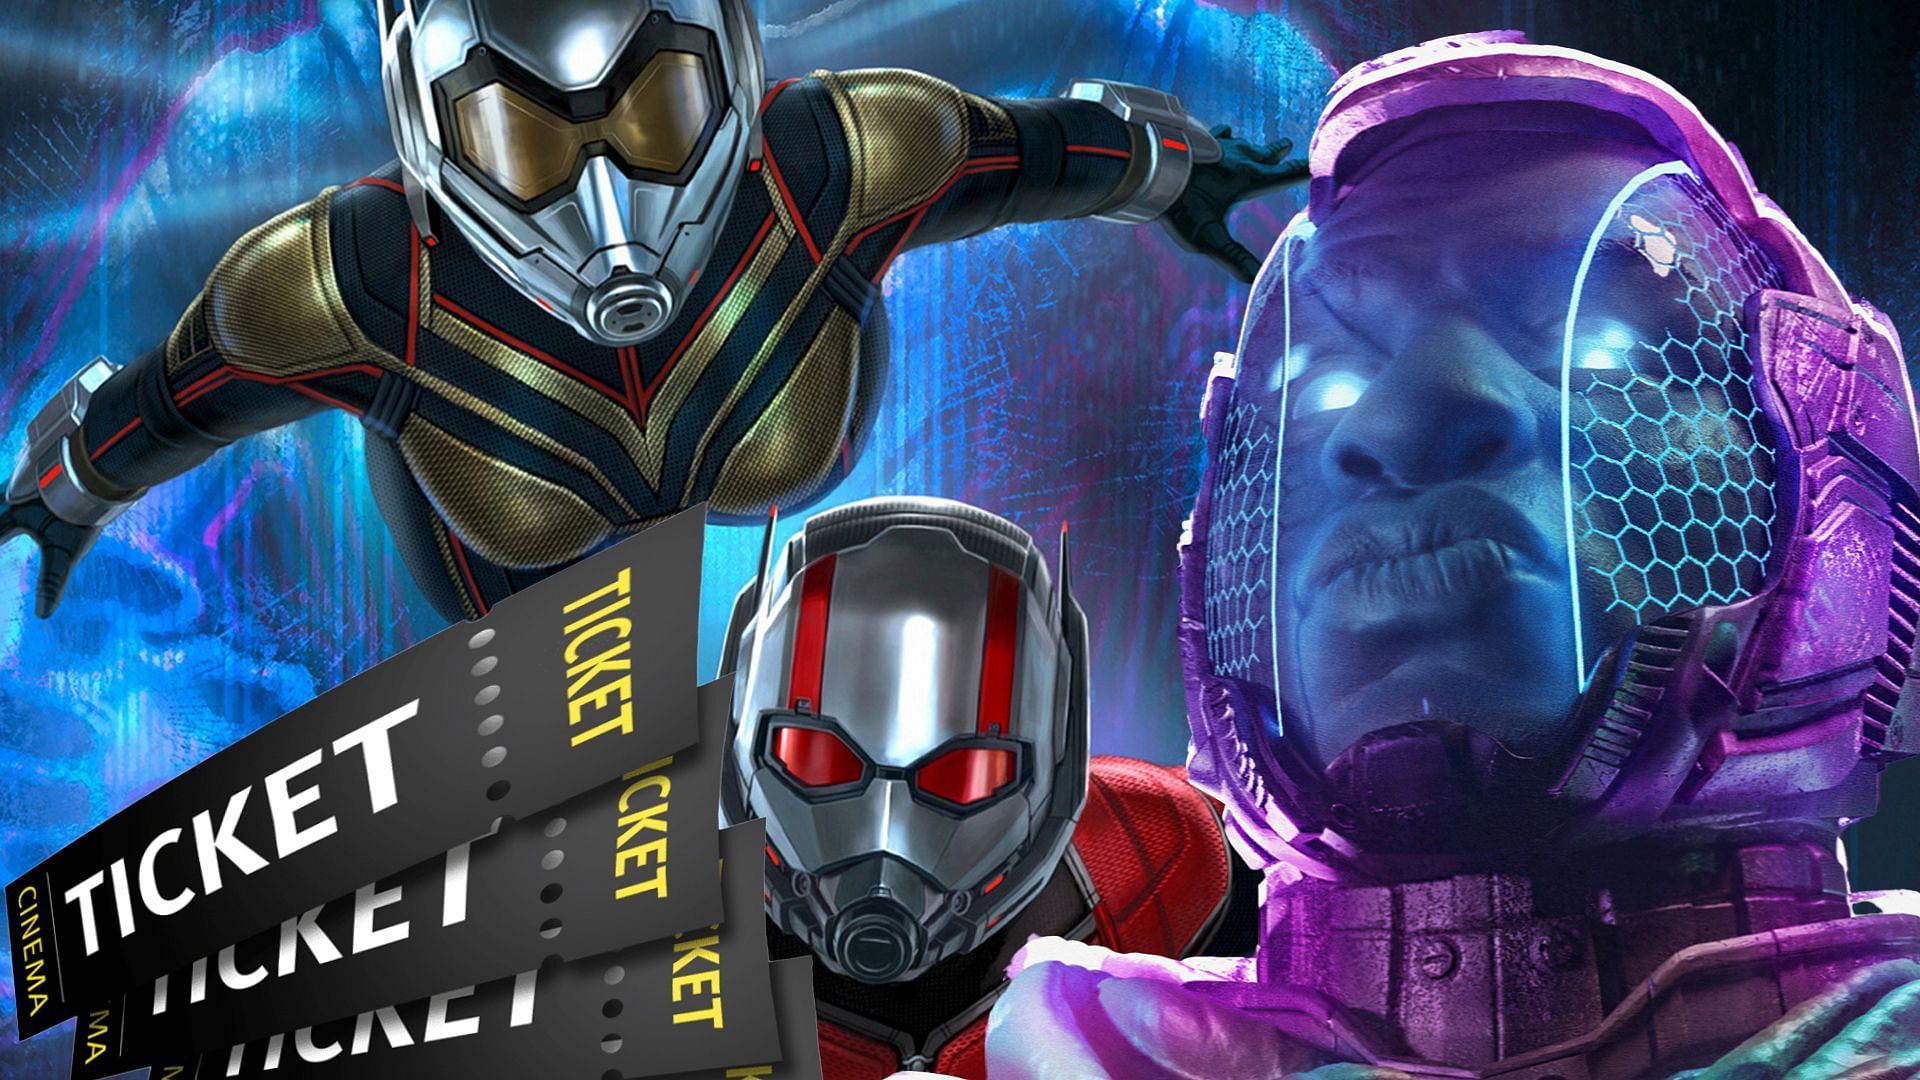 Marvel Releases Three New Posters for Upcoming Film “Ant-Man